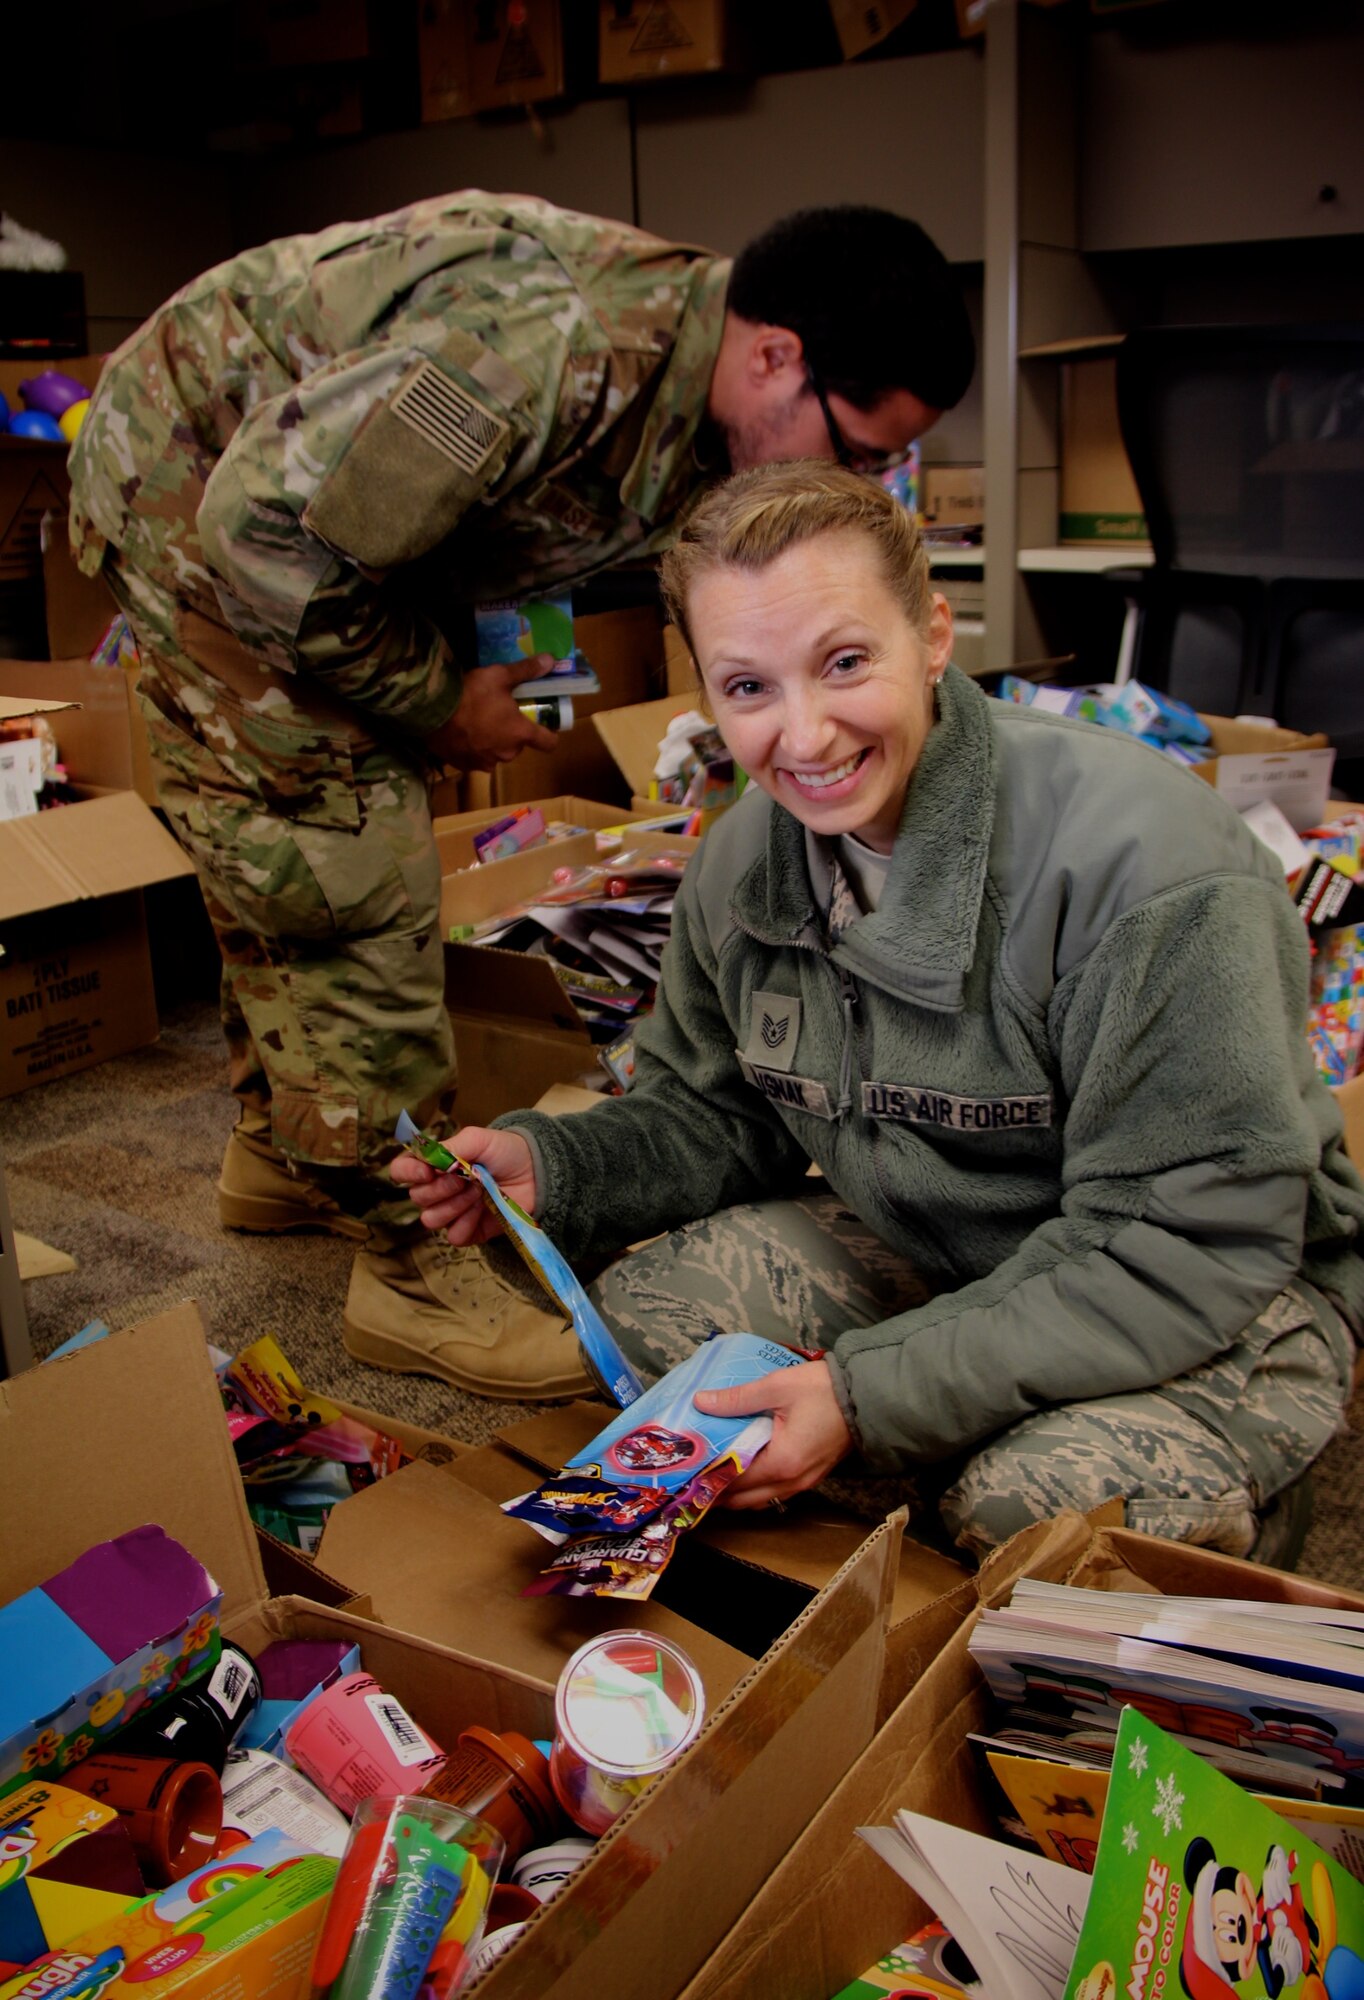 Making her holiday list and checking it twice, Tech Sgt. Teresa Rusnak, picks up the Airman and Family Readiness office's free toy donations for her children.  She is the readiness planner for 932nd Airlift Wing's Inspector General of Inspections at the Illinois unit.  A variety of toys, cookies, and candy are ready to be distributed through the 932nd Airlift Wing Family Readiness Office, led by Deb Teague.  She and other reservists offloaded many parcels of food, toys and cookies recently, on behalf of the Air Force Reserve Command unit located at Scott Air Force Base, Ill. The items will be given out to reservists in Illinois during the December unit training assembly weekend.  (U.S. Air Force photo by Lt. Col. Stan Paregien)